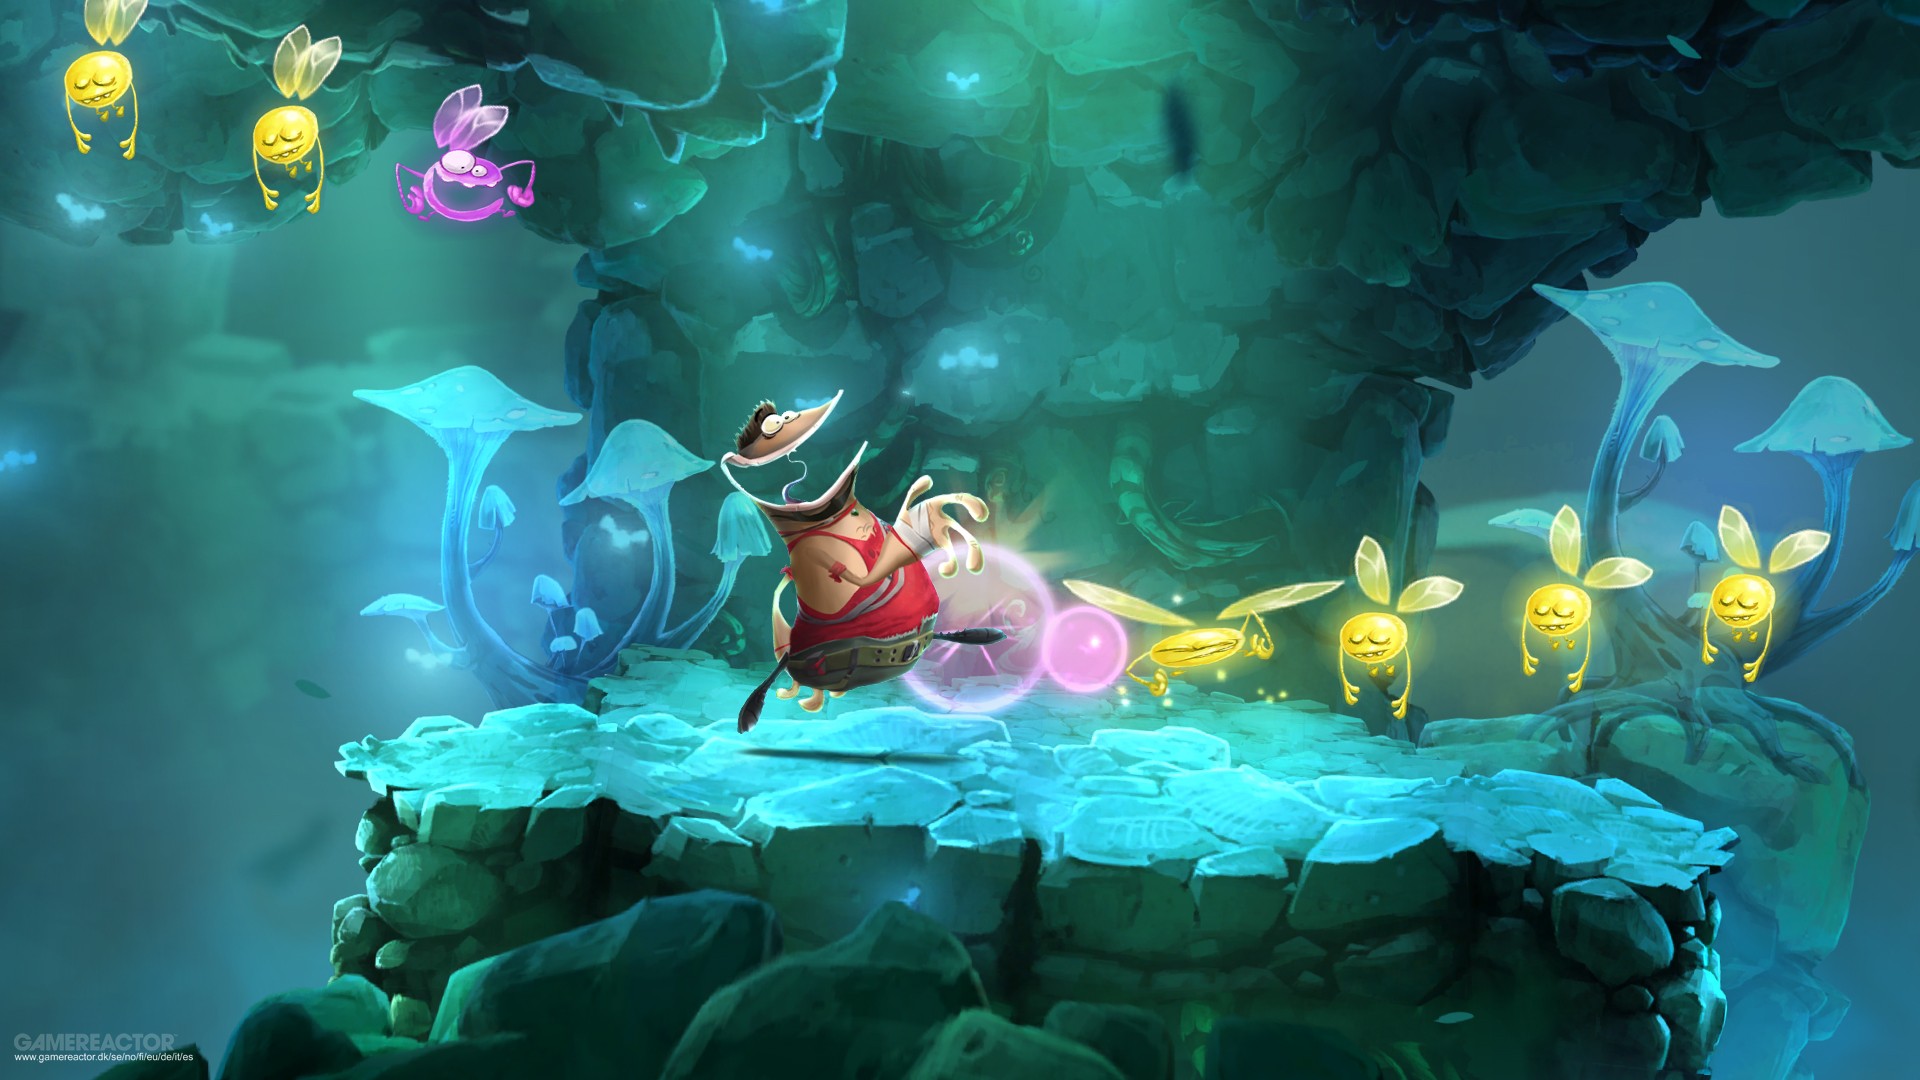 GR Live: Rayman on PS4